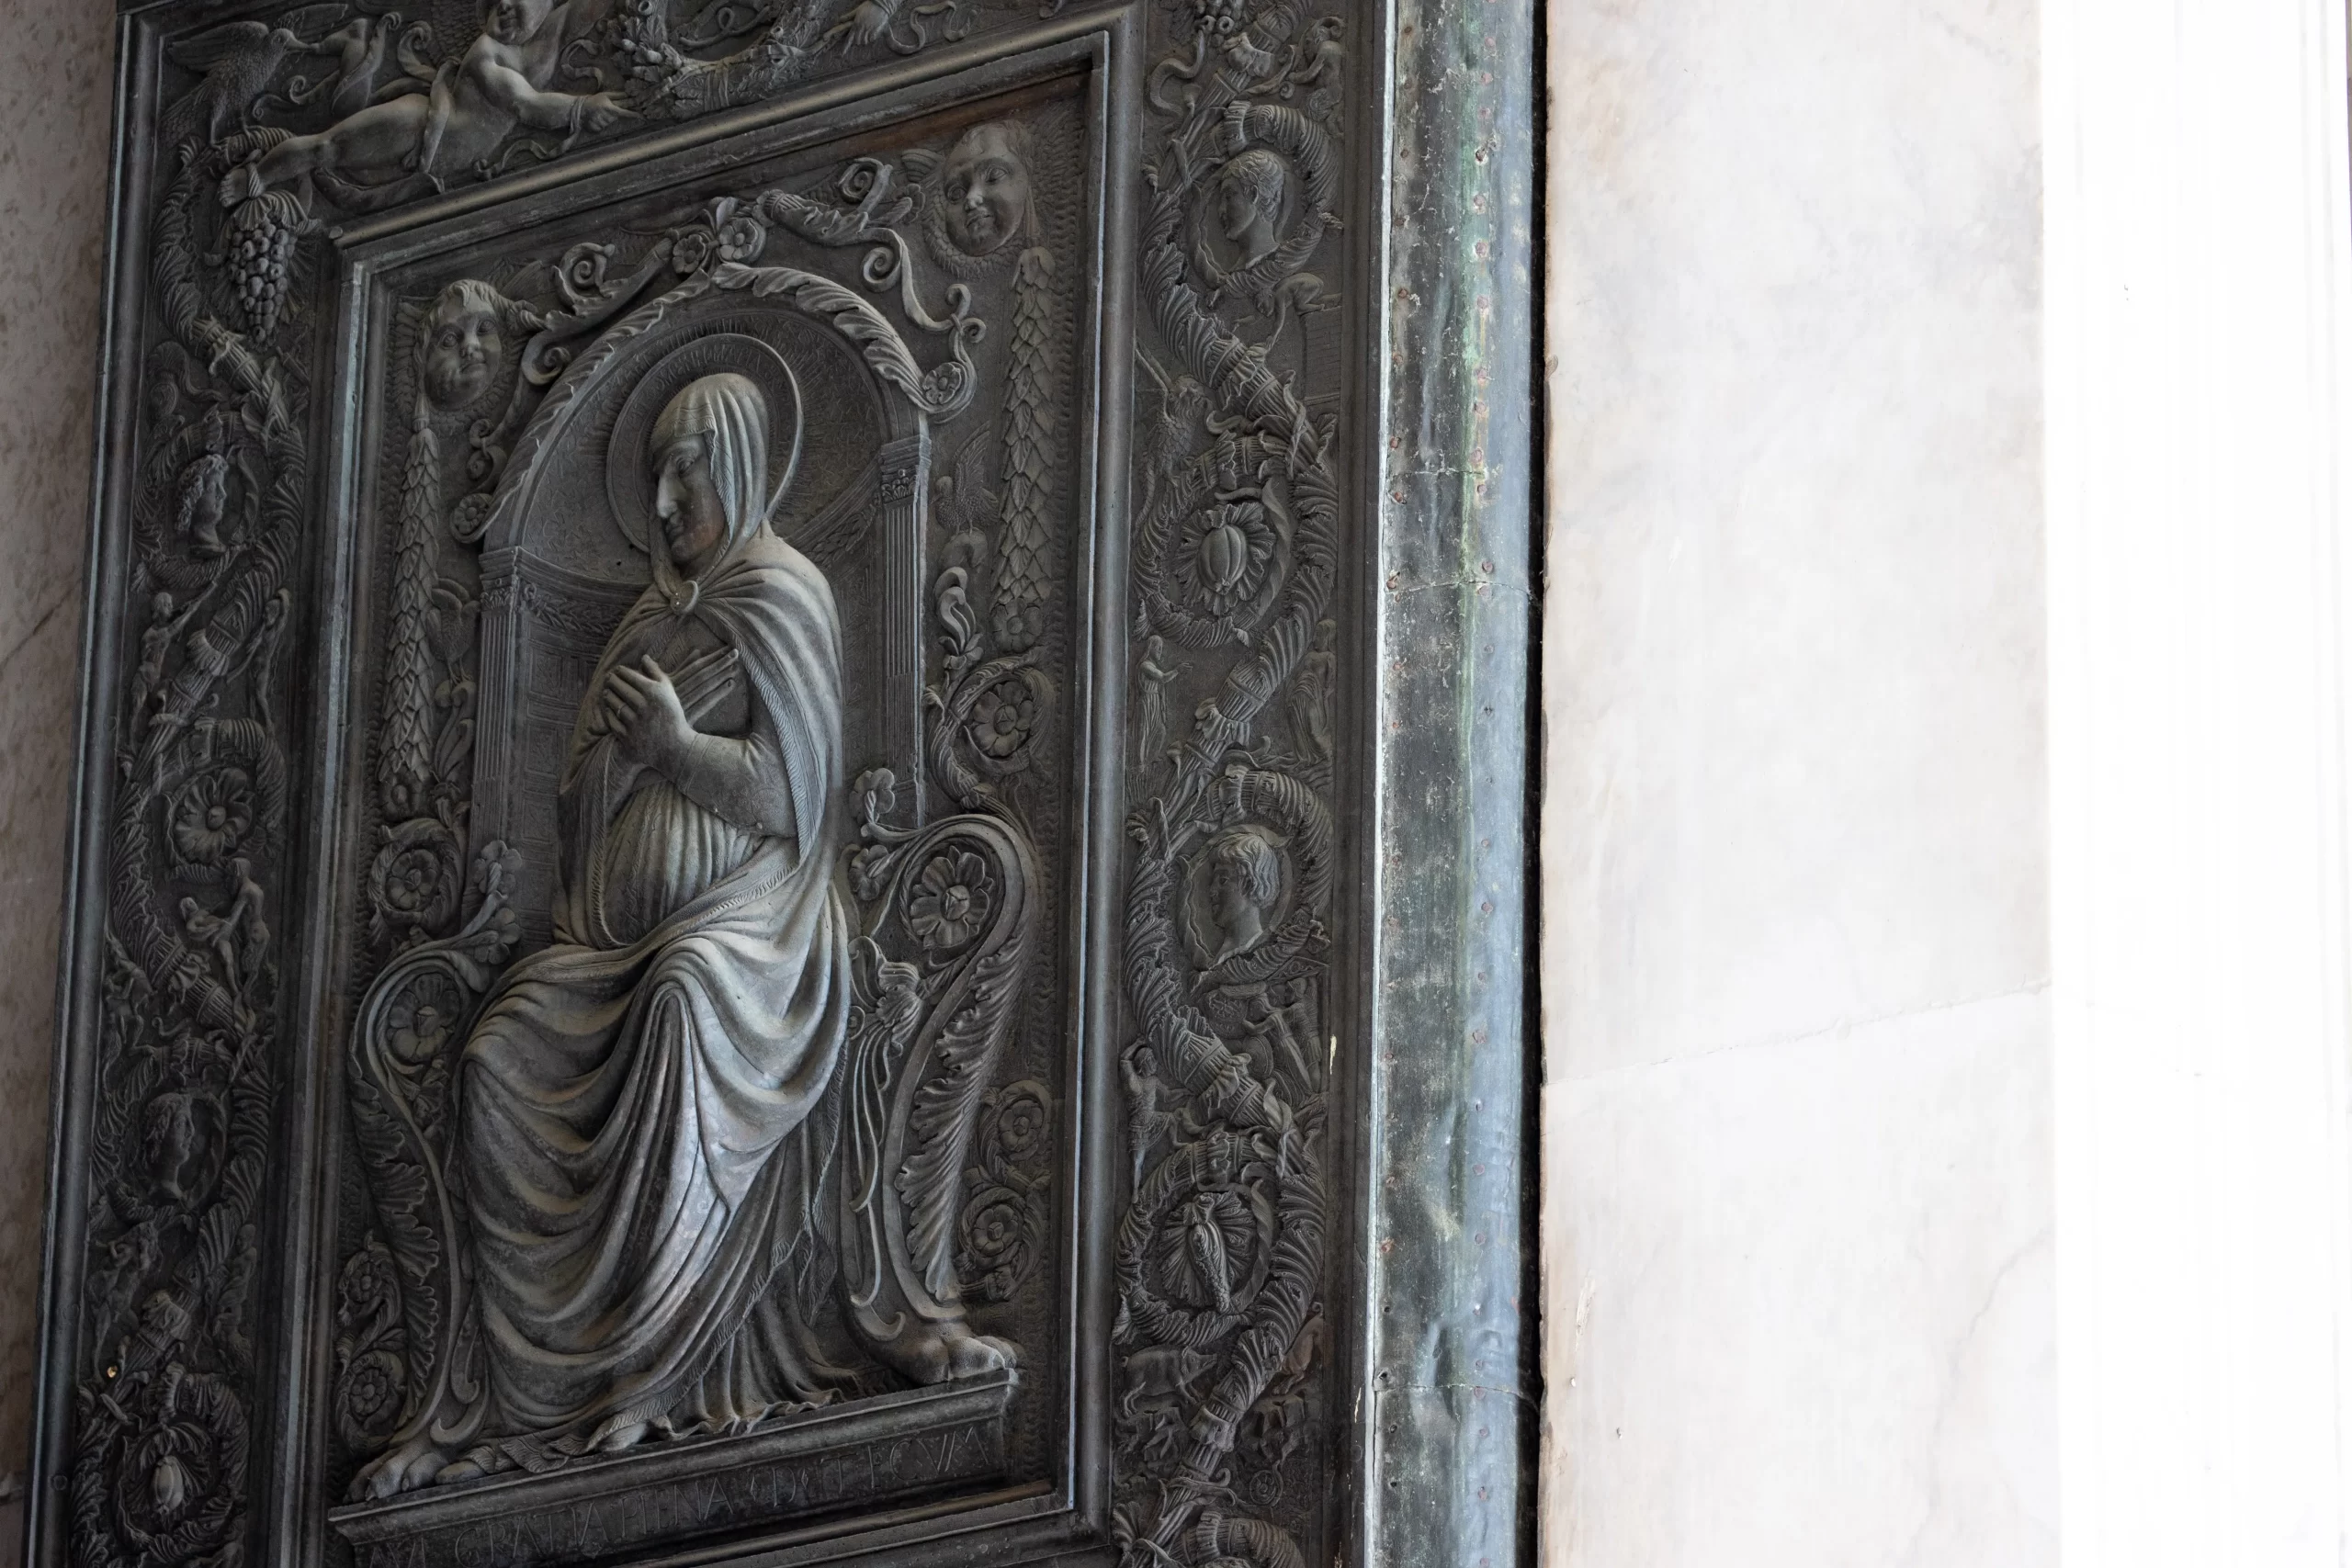 According to Father Agnello Stoia, the pastor of the parish of St. Peter’s Basilica, the 15th-century image of Mary on the oldest door of St. Peter’s Basilica is a reminder of Mary’s title, “Gate of Heaven.”. Daniel Ibañez/CNA